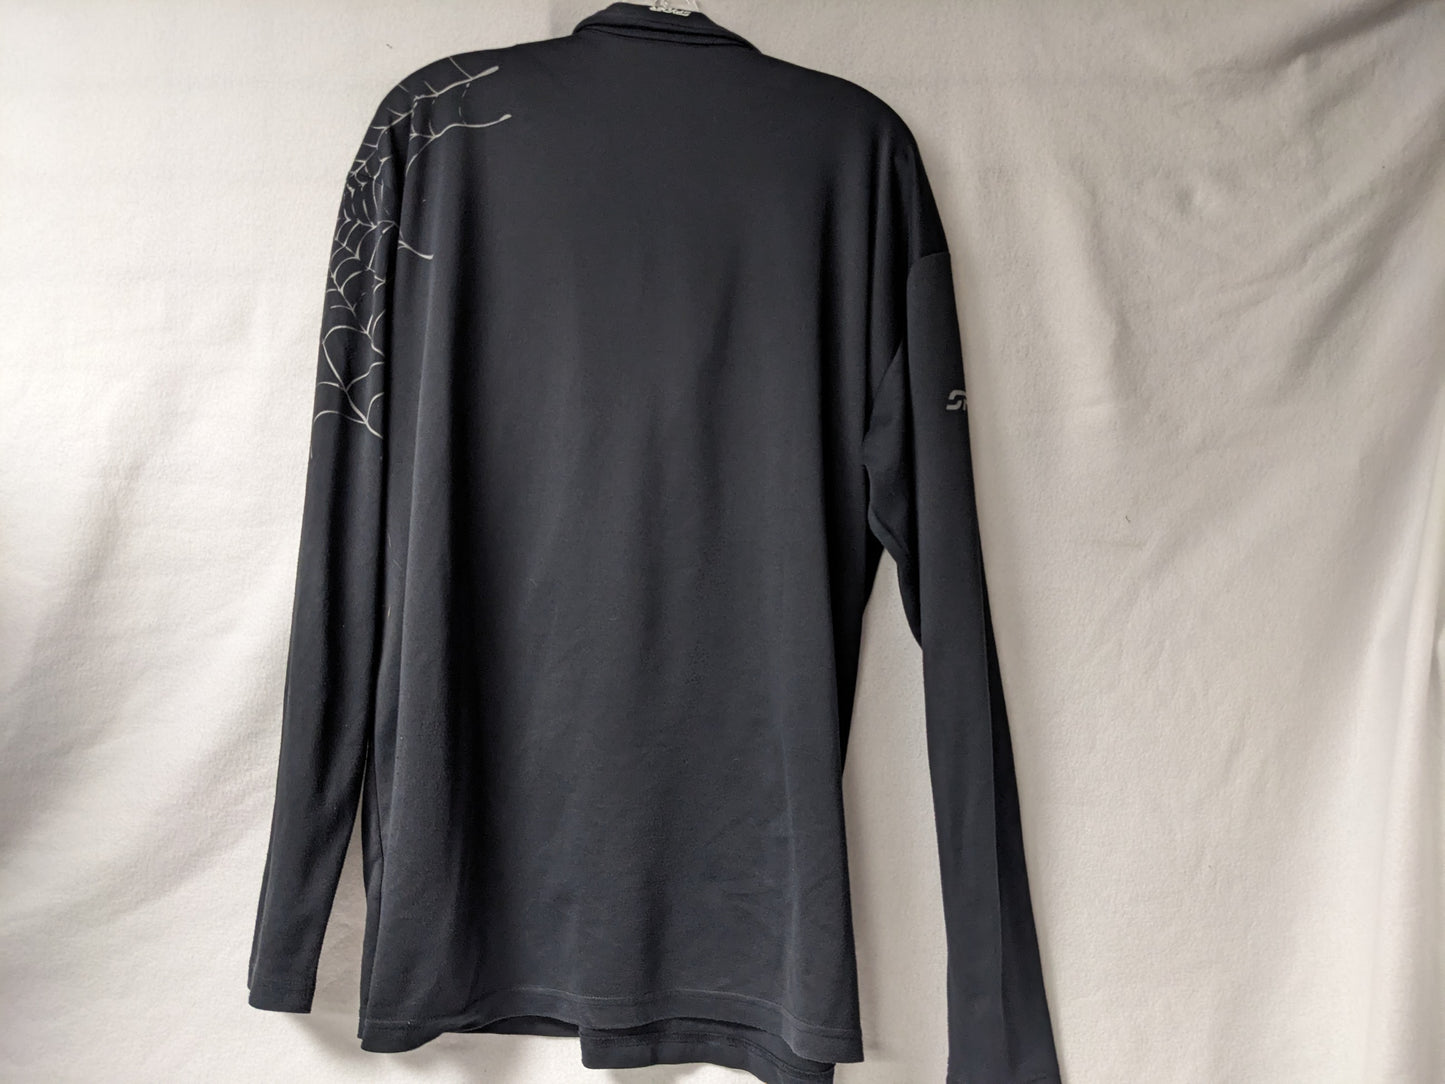 Spyder Long Sleeve Half Zip Shirt Size XL Color Black Condition Used